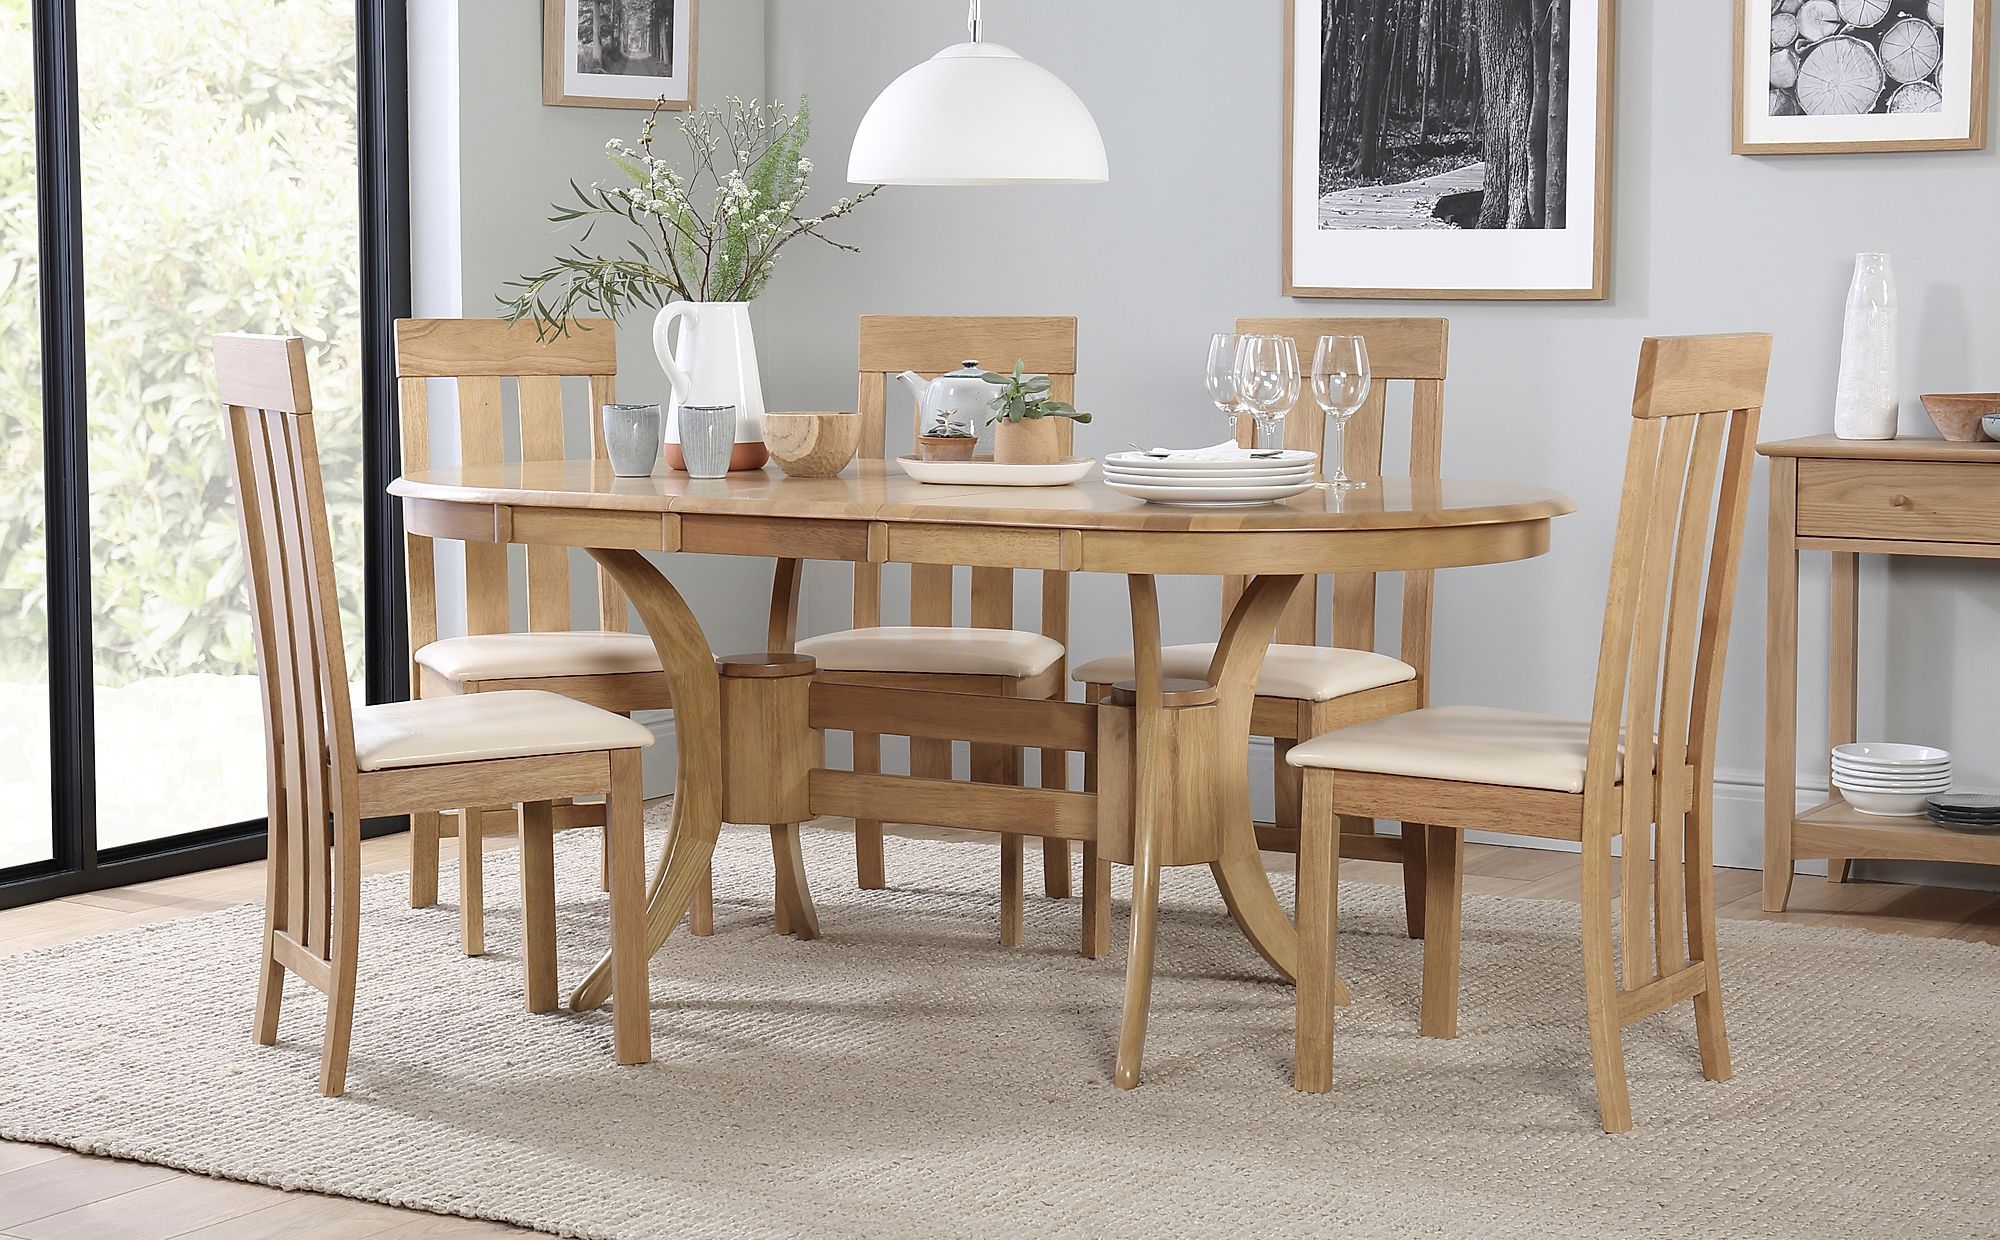 Townhouse Oval Oak Extending Dining Table With 4 Chester Chairs (Ivory Throughout Extendable Oval Dining Sets (View 6 of 15)